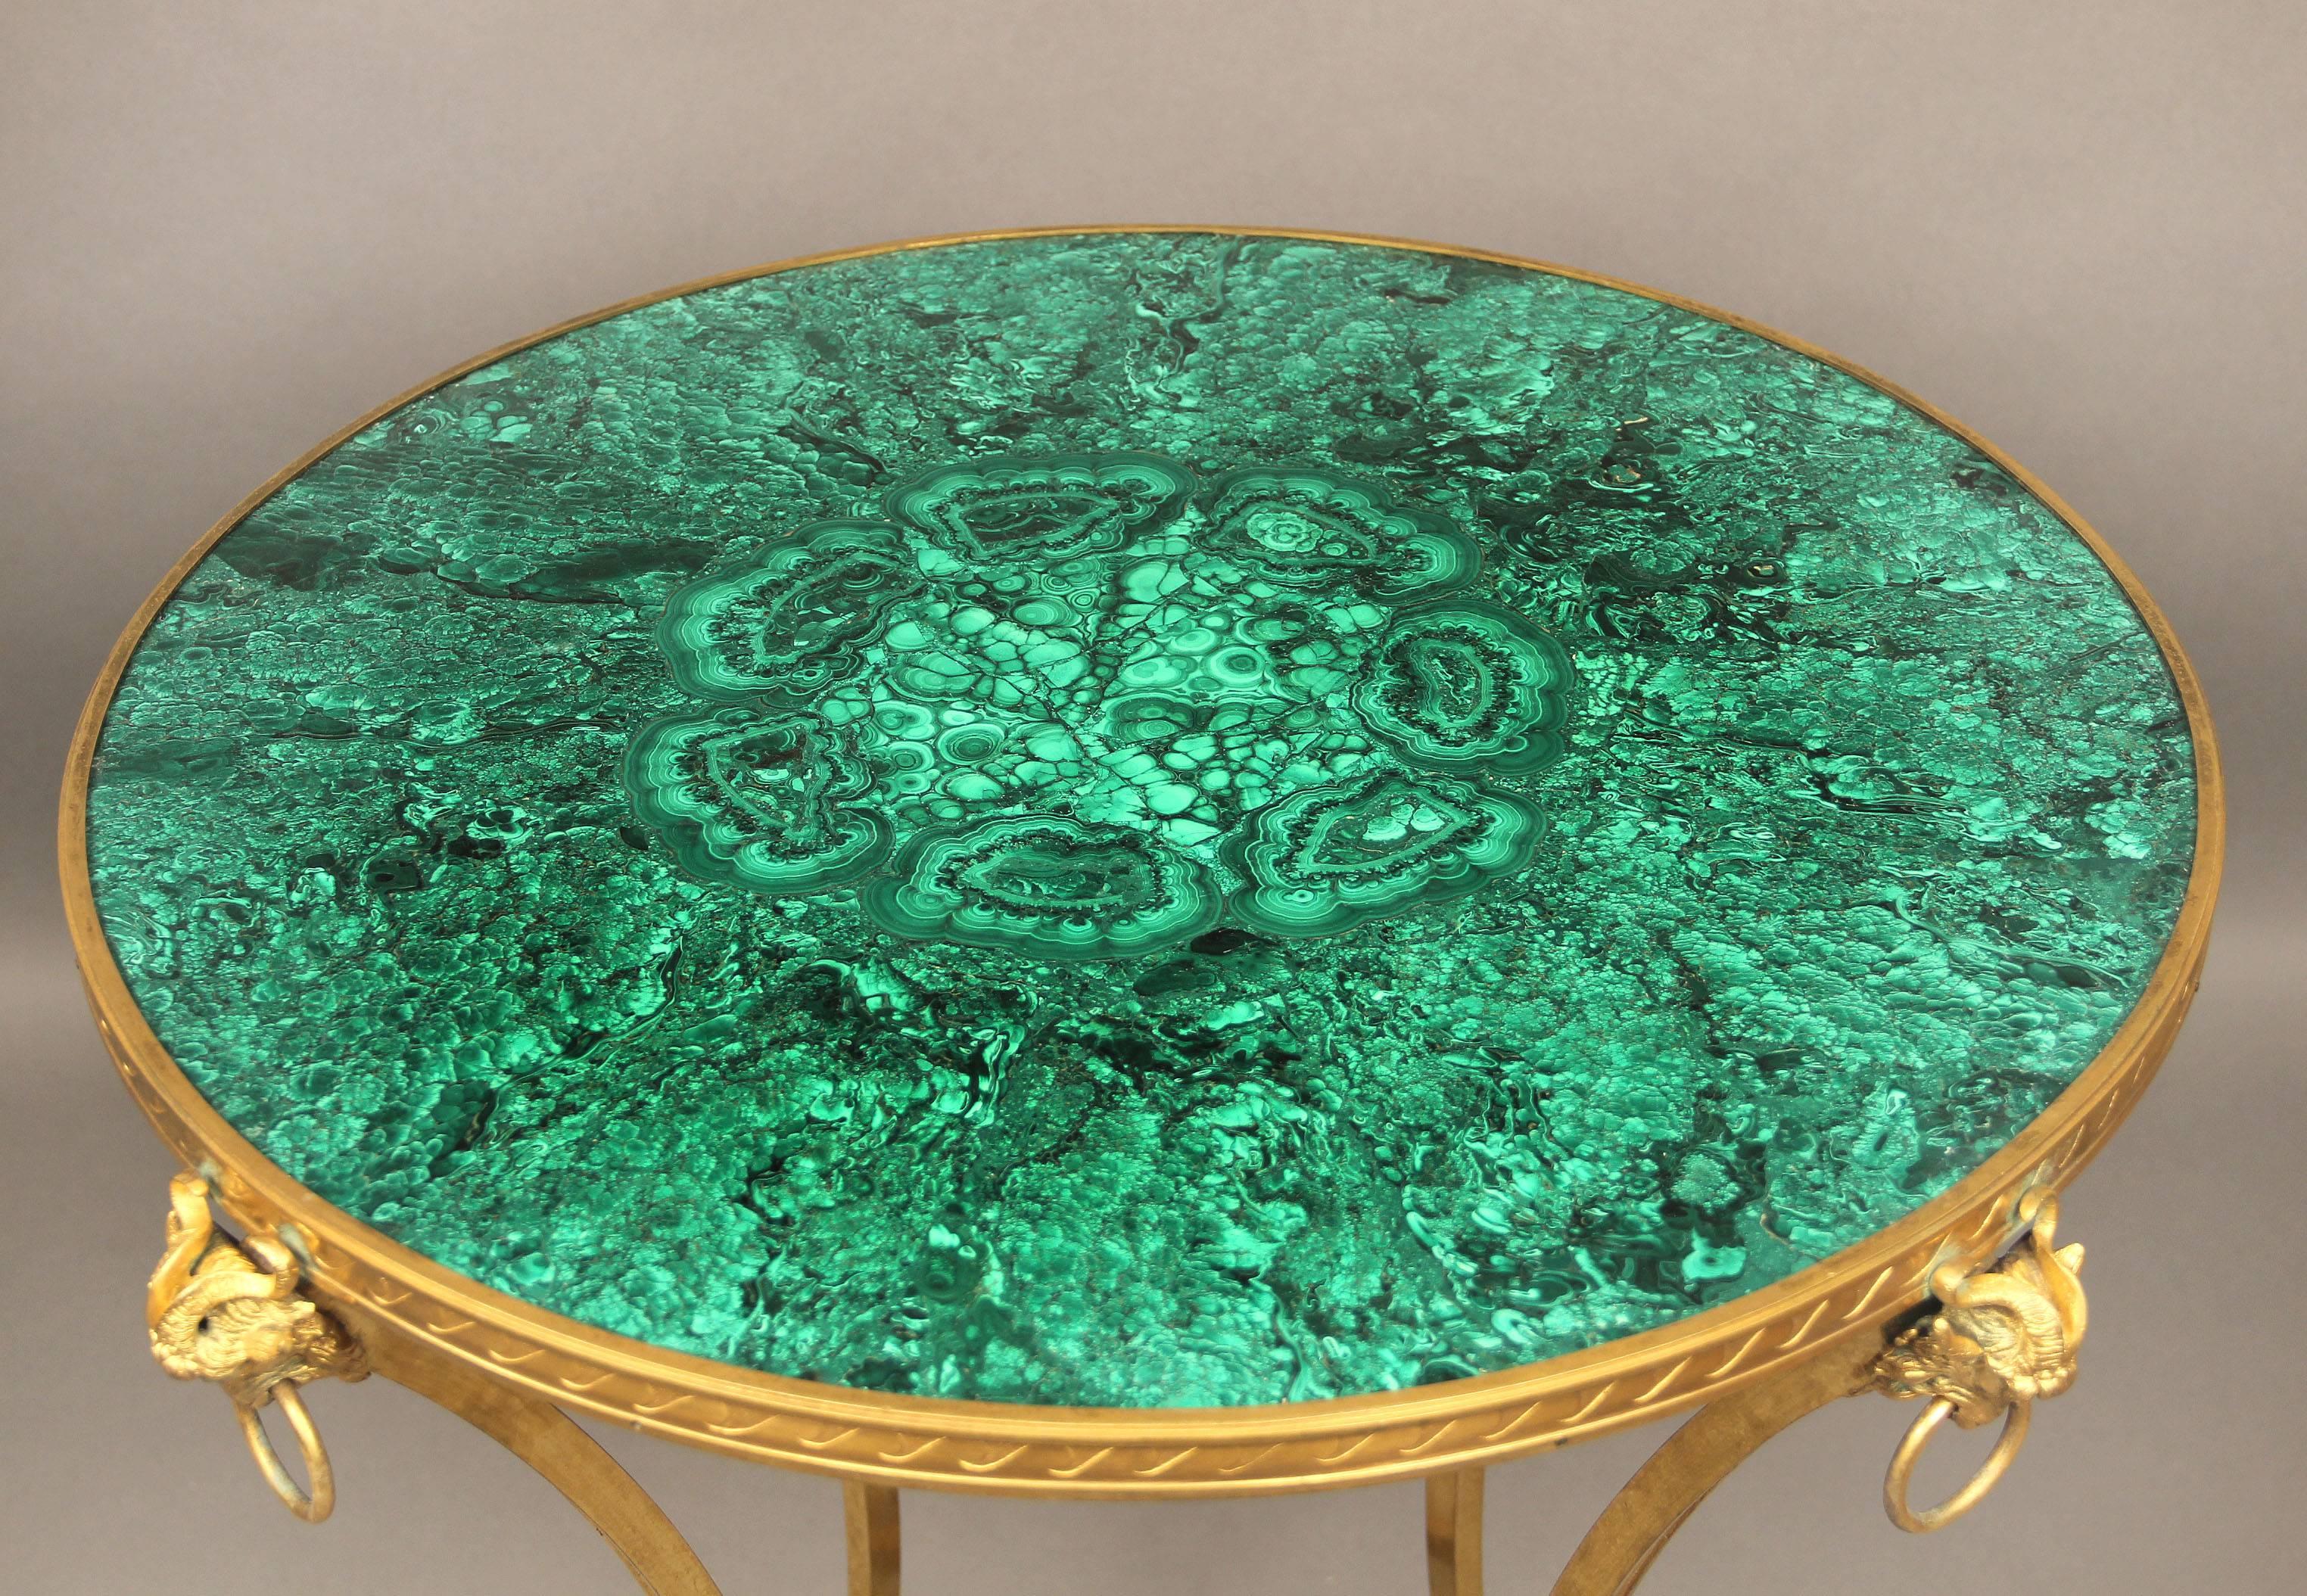 A late 19th century gilt bronze and giltwood mounted Empire style malachite lamp table. 

Beautiful malachite top above gilt bronze ram head mounts, giltwood stretcher joins the bronze legs.
 
Malachite is a semi-precious stone and also a